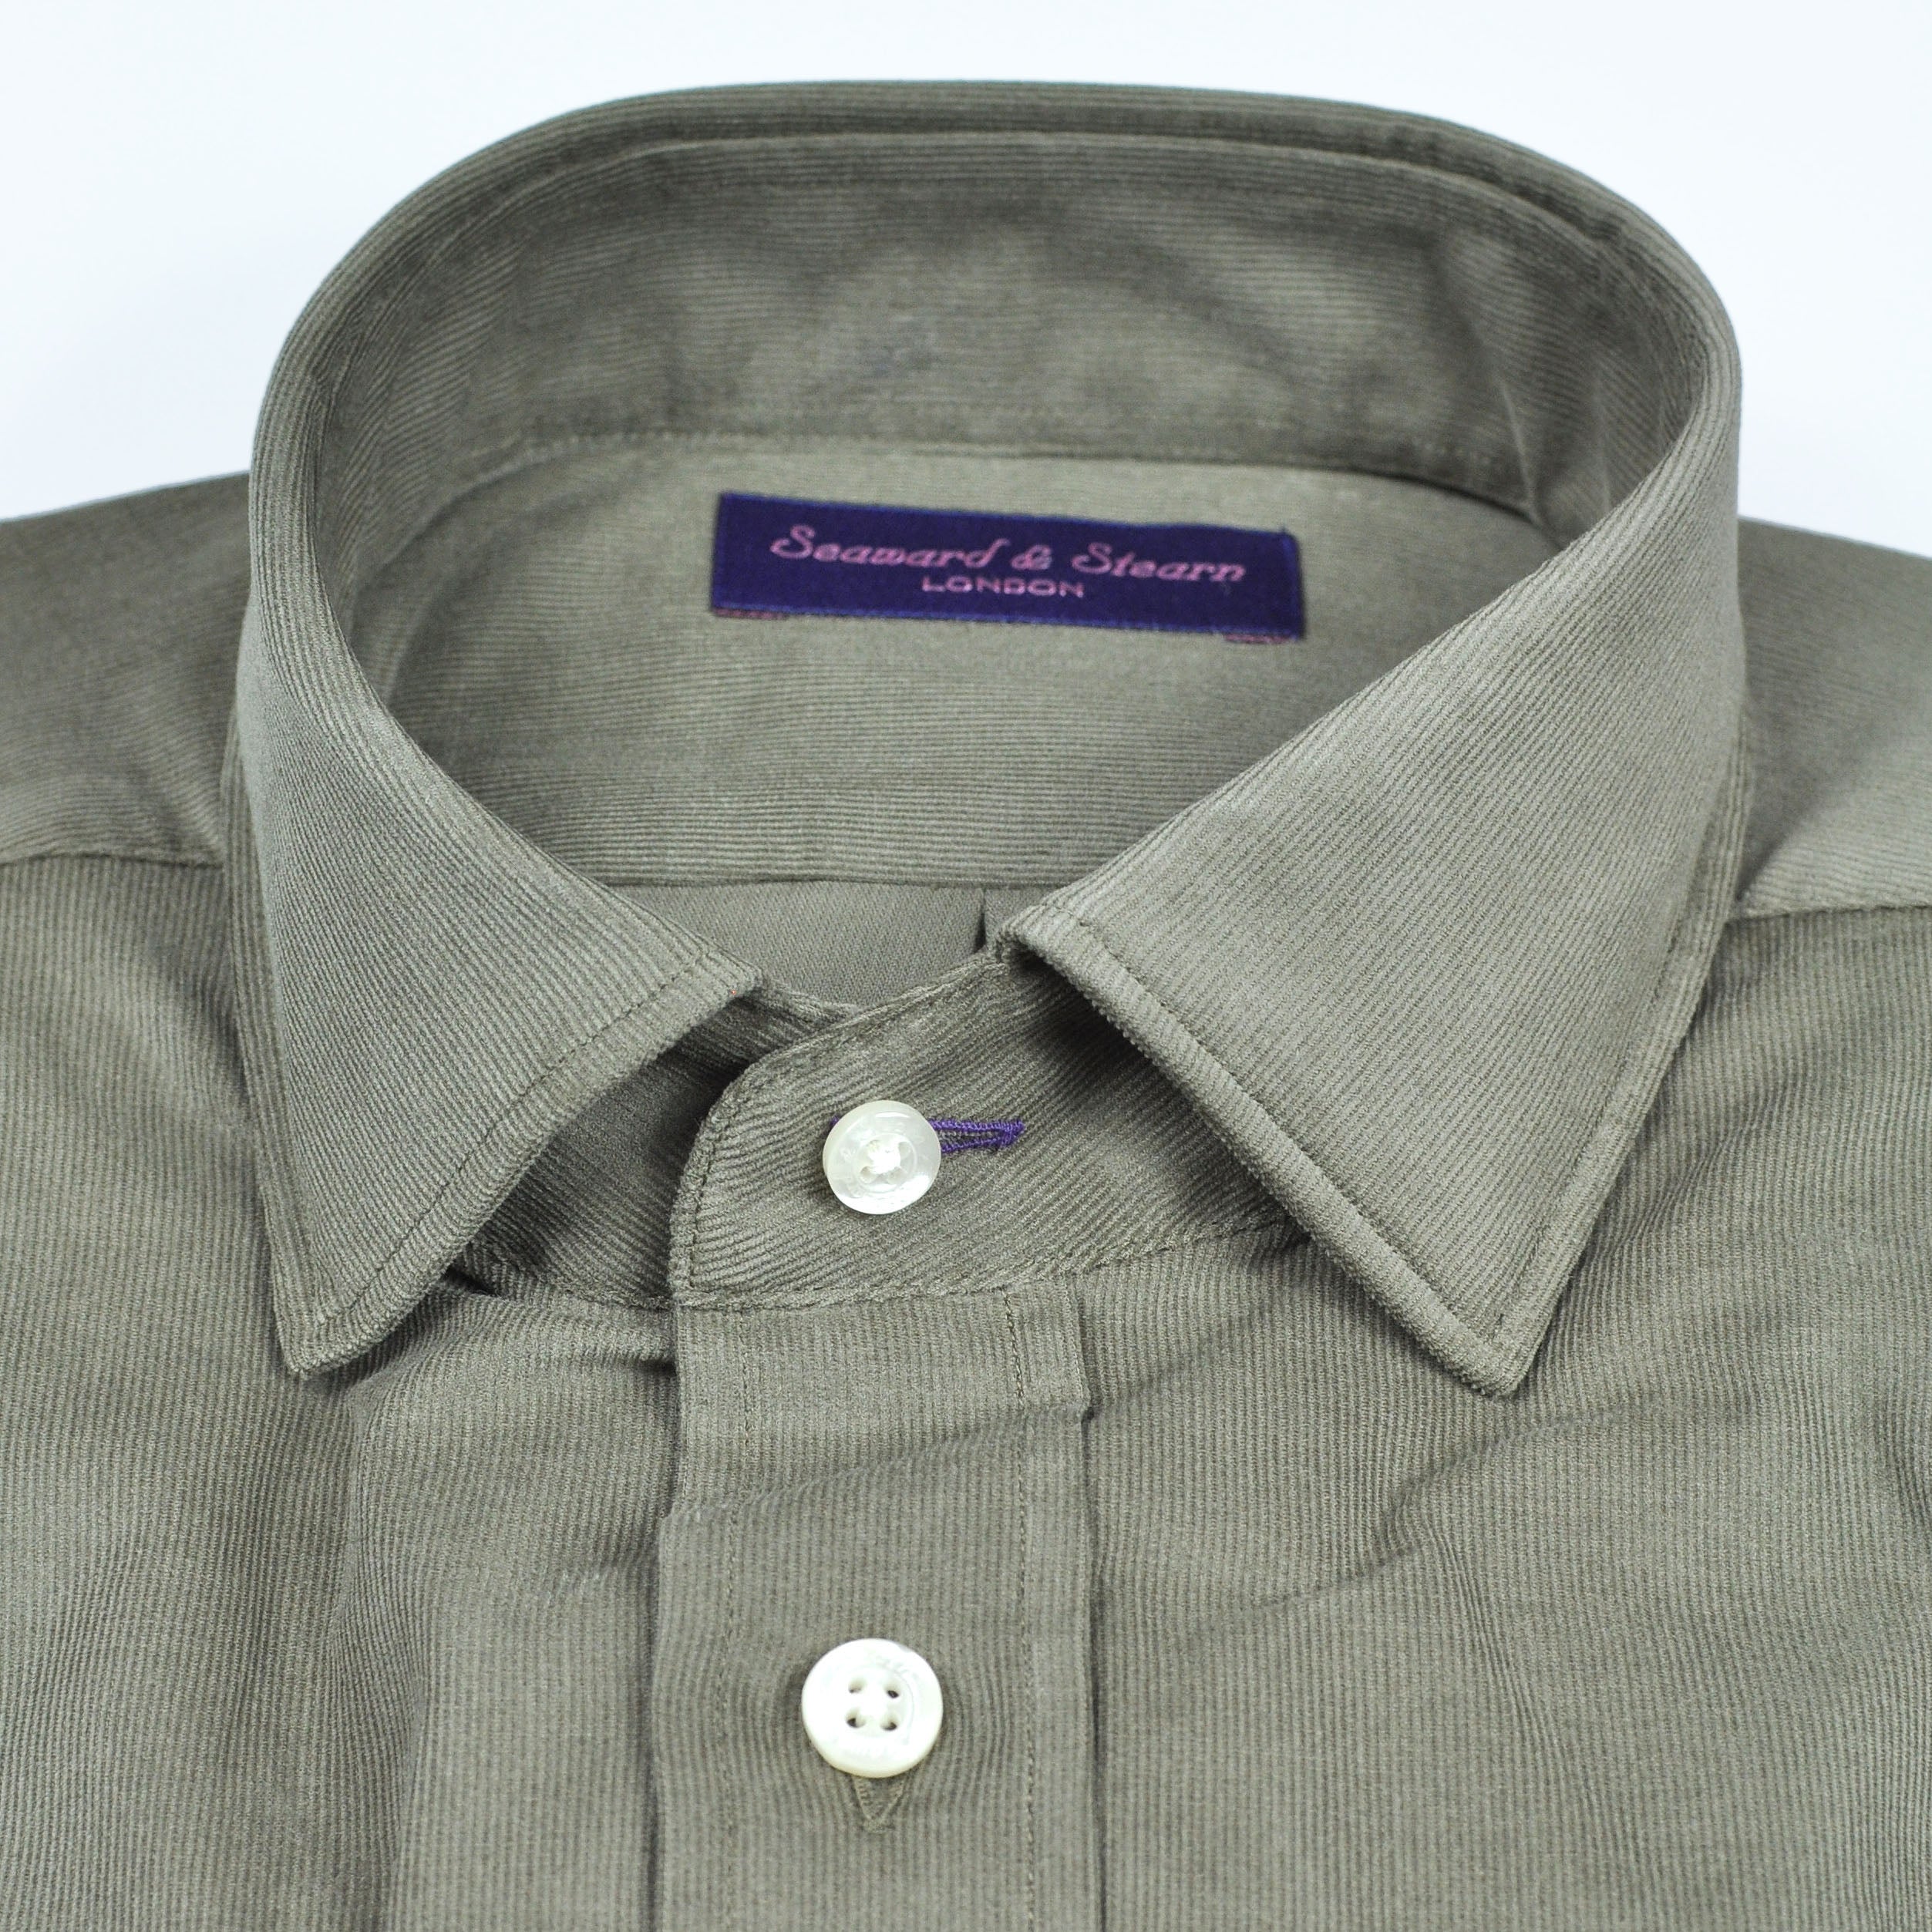 Fine Corduroy Spread Collar Shirt with Double Breast Pockets in Olive